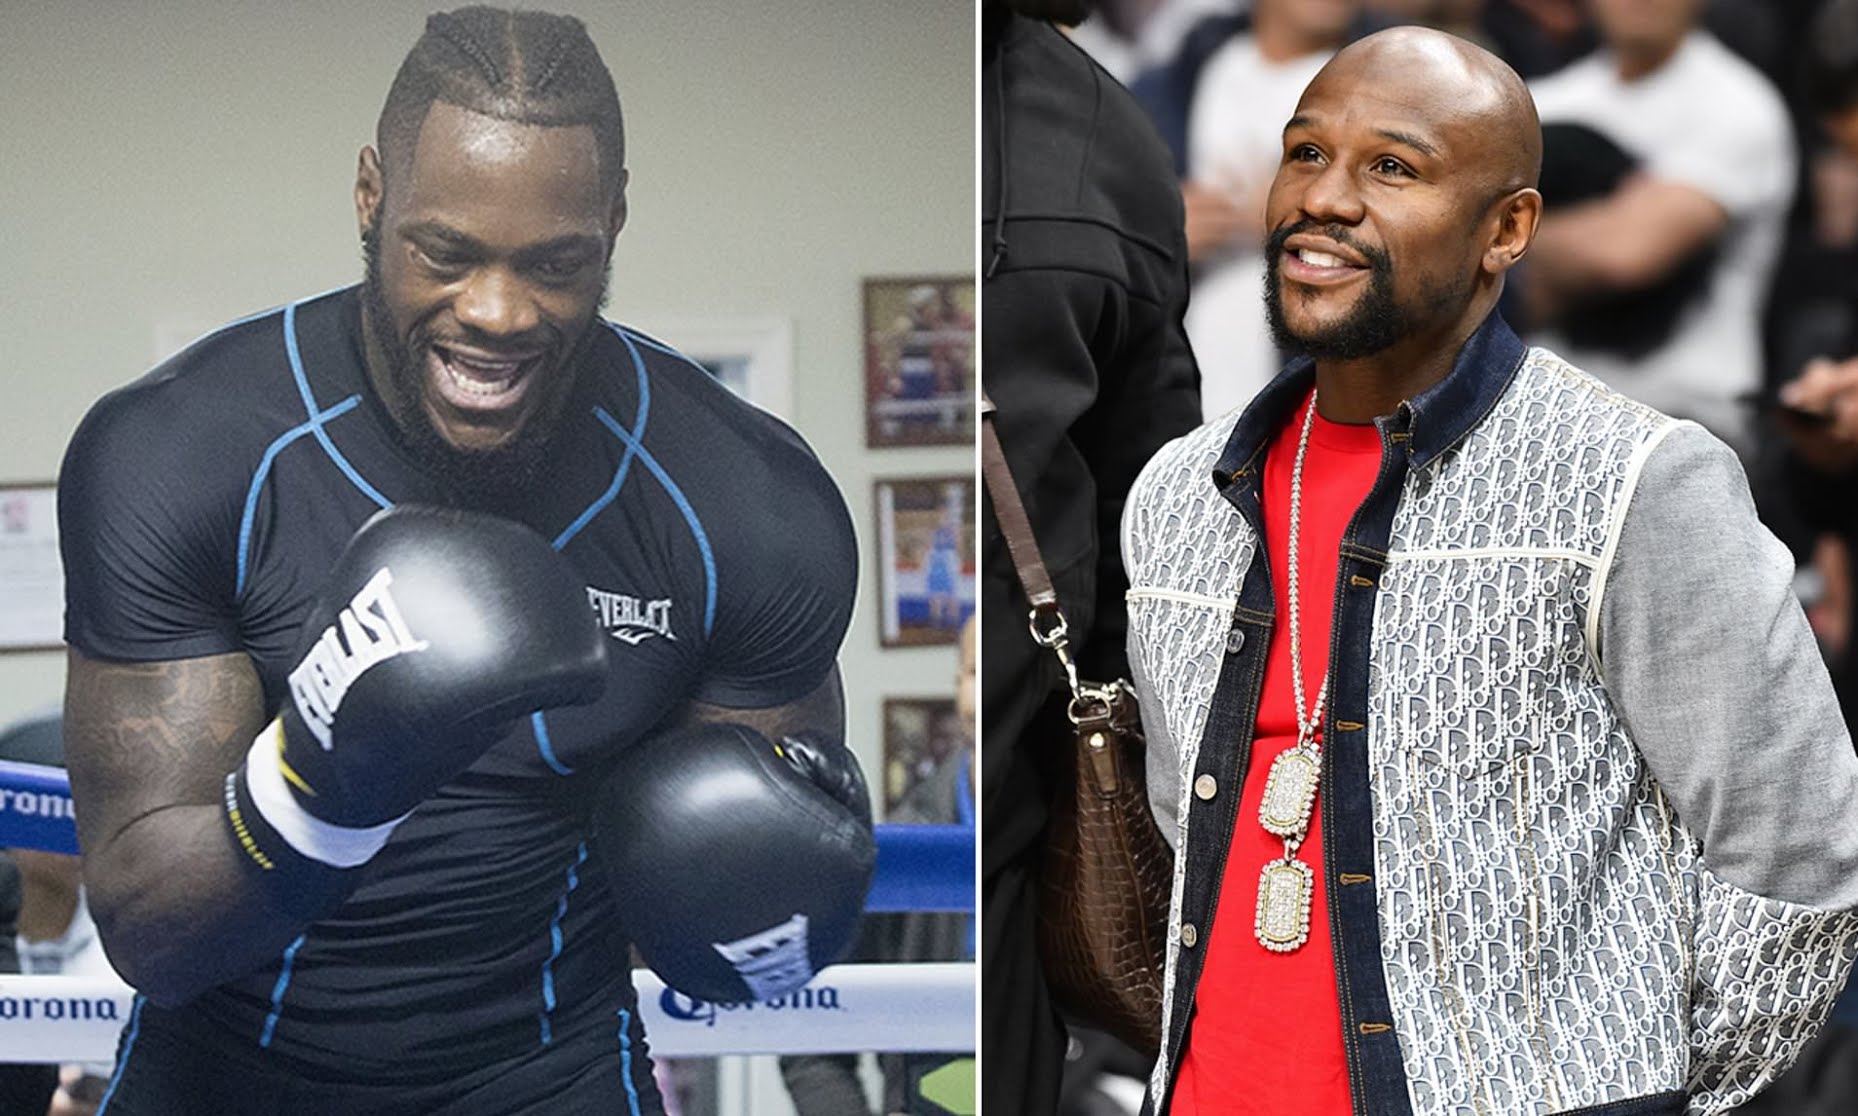 Deontay Wilder Responds To Floyd Mayweather's Offer To Train Him